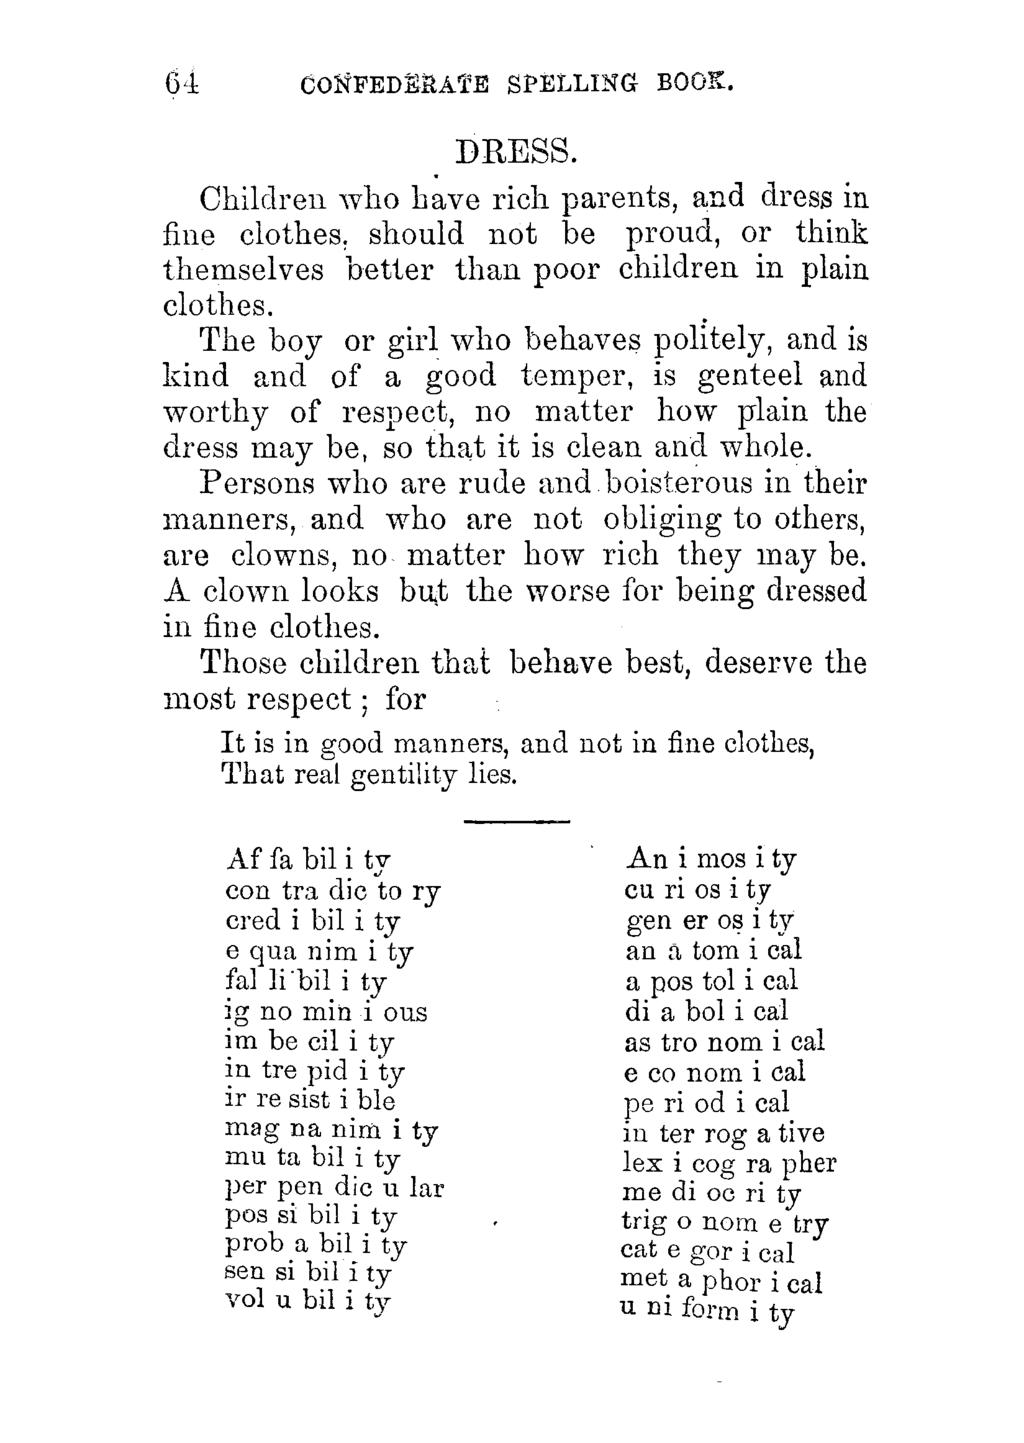 64 CONFEDERATE SPELLING BOOK. DBESS. Children who have rich parents, and dress in fine clothes, should not be proud, or think themselves better than poor children in plain clothes.